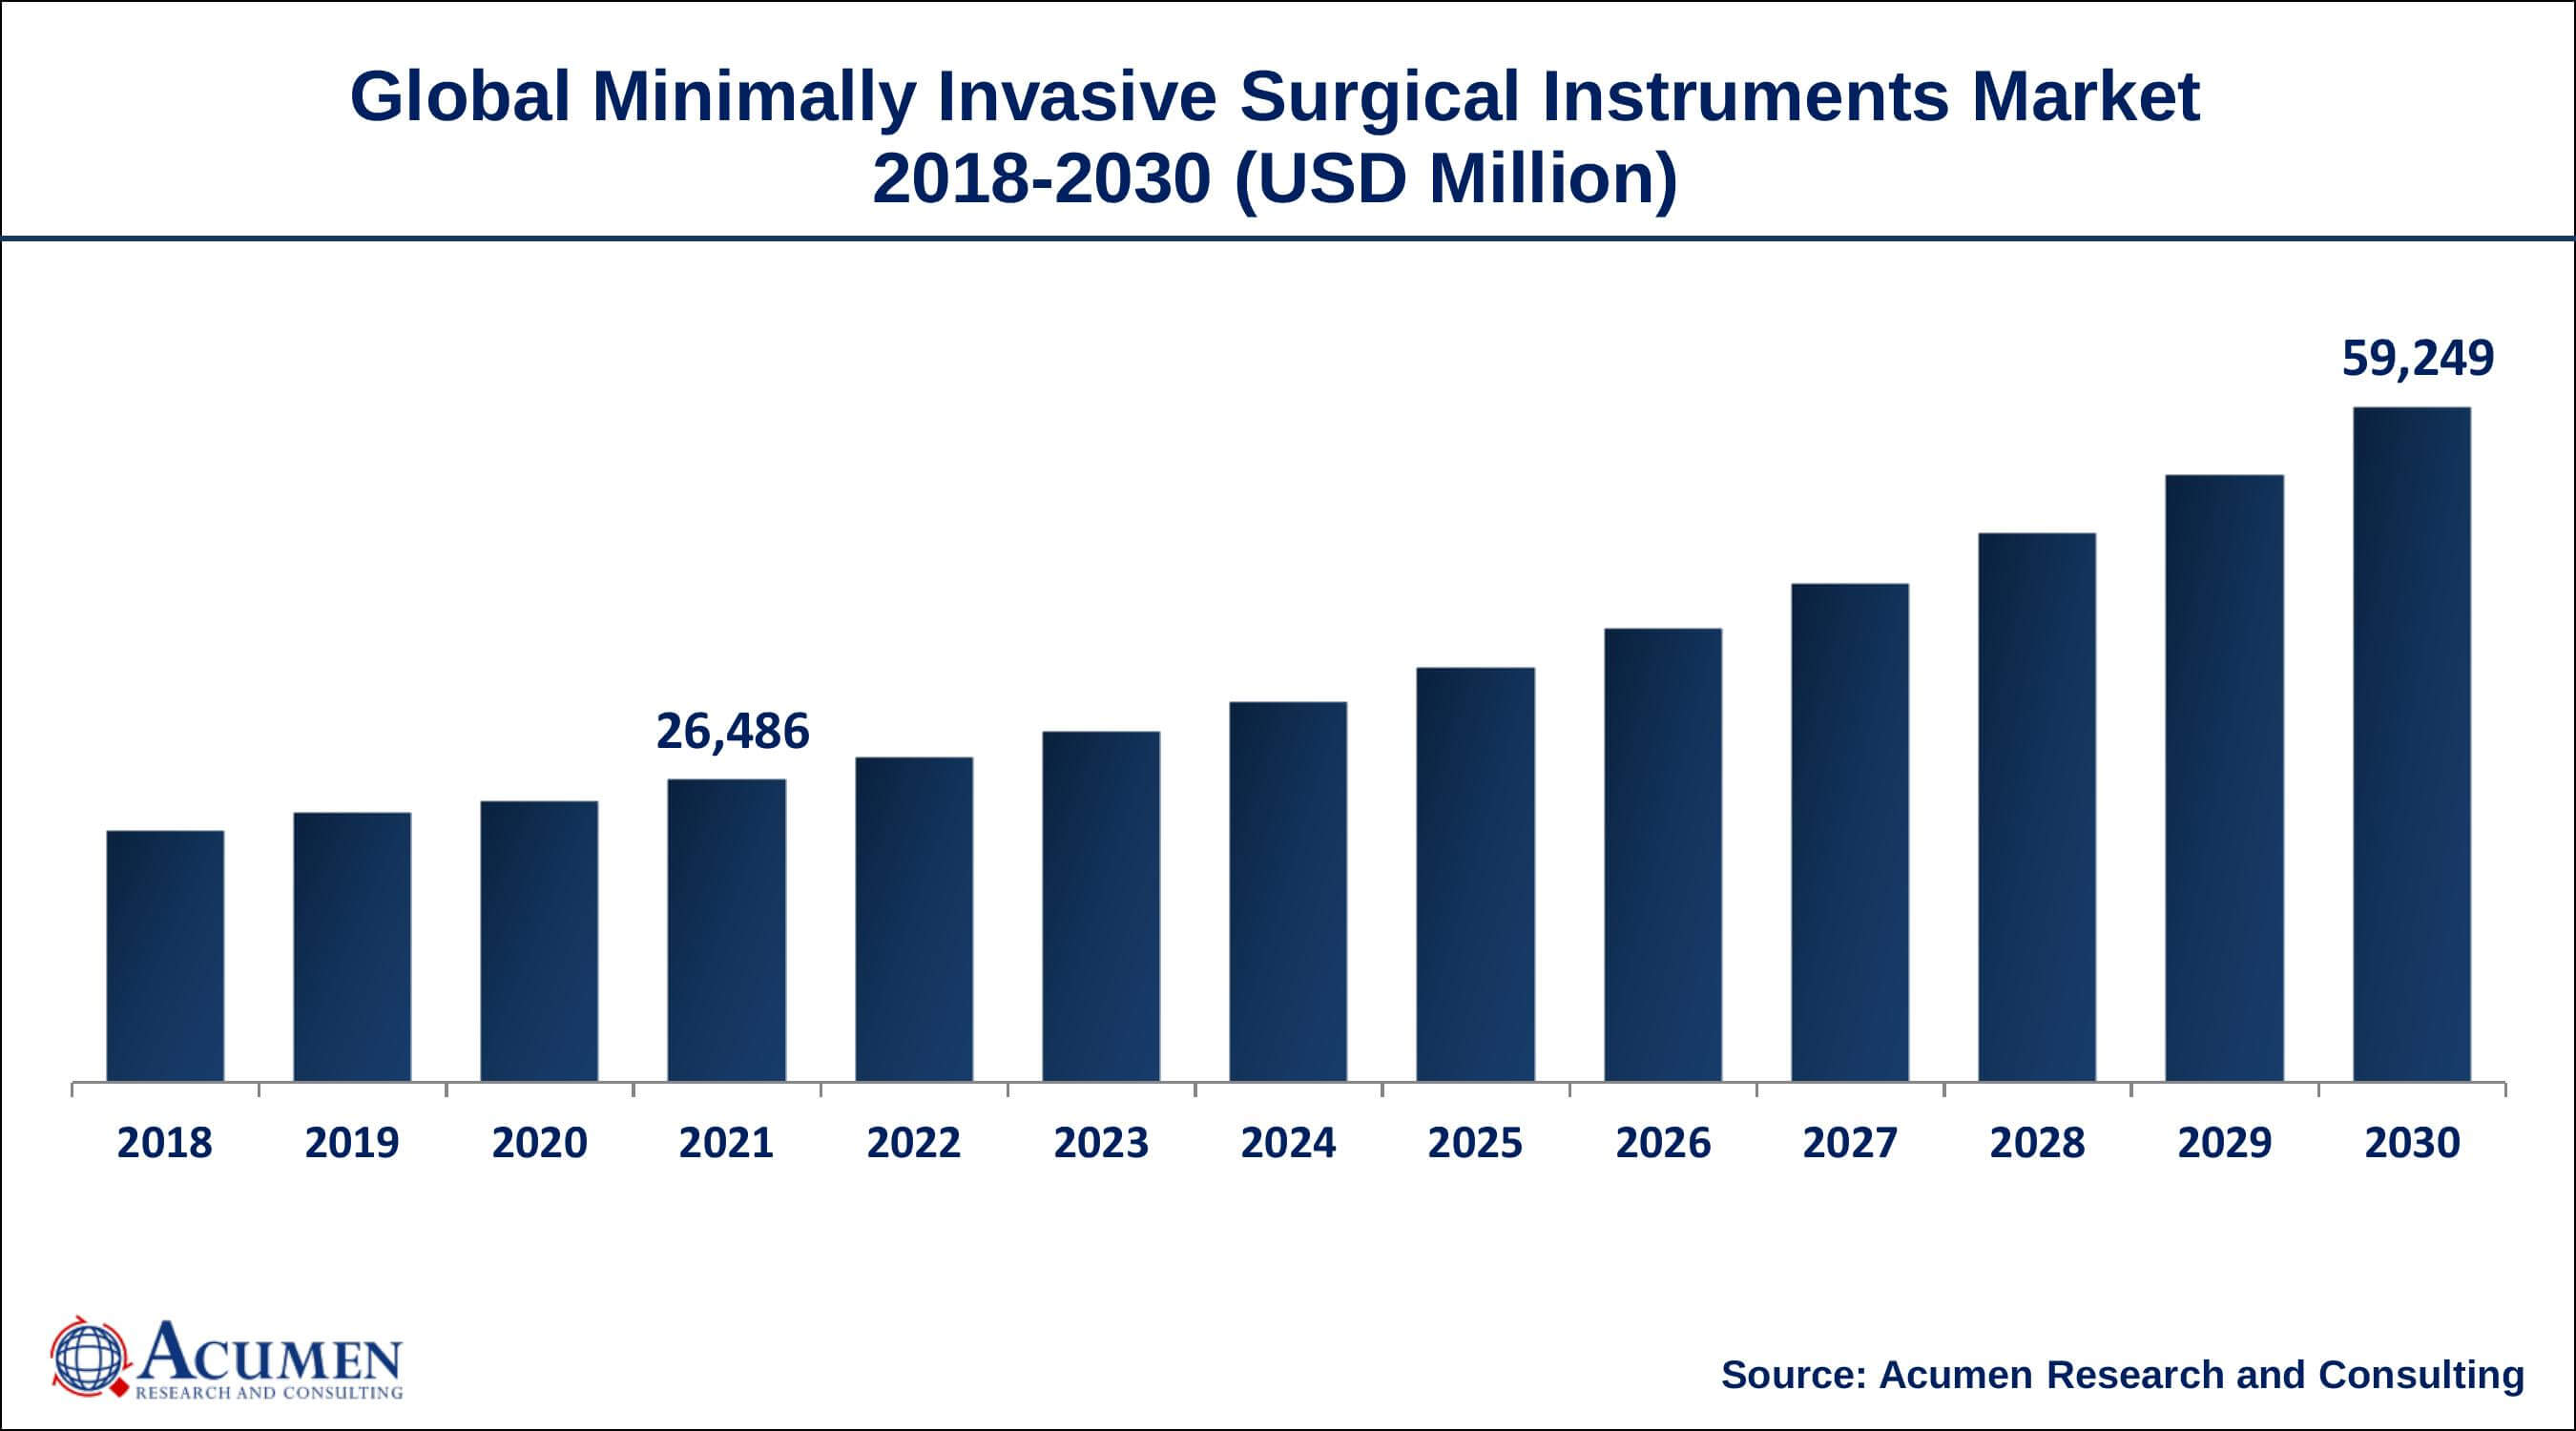 North America region led with more than 42% minimally invasive surgical instruments market share in 2021